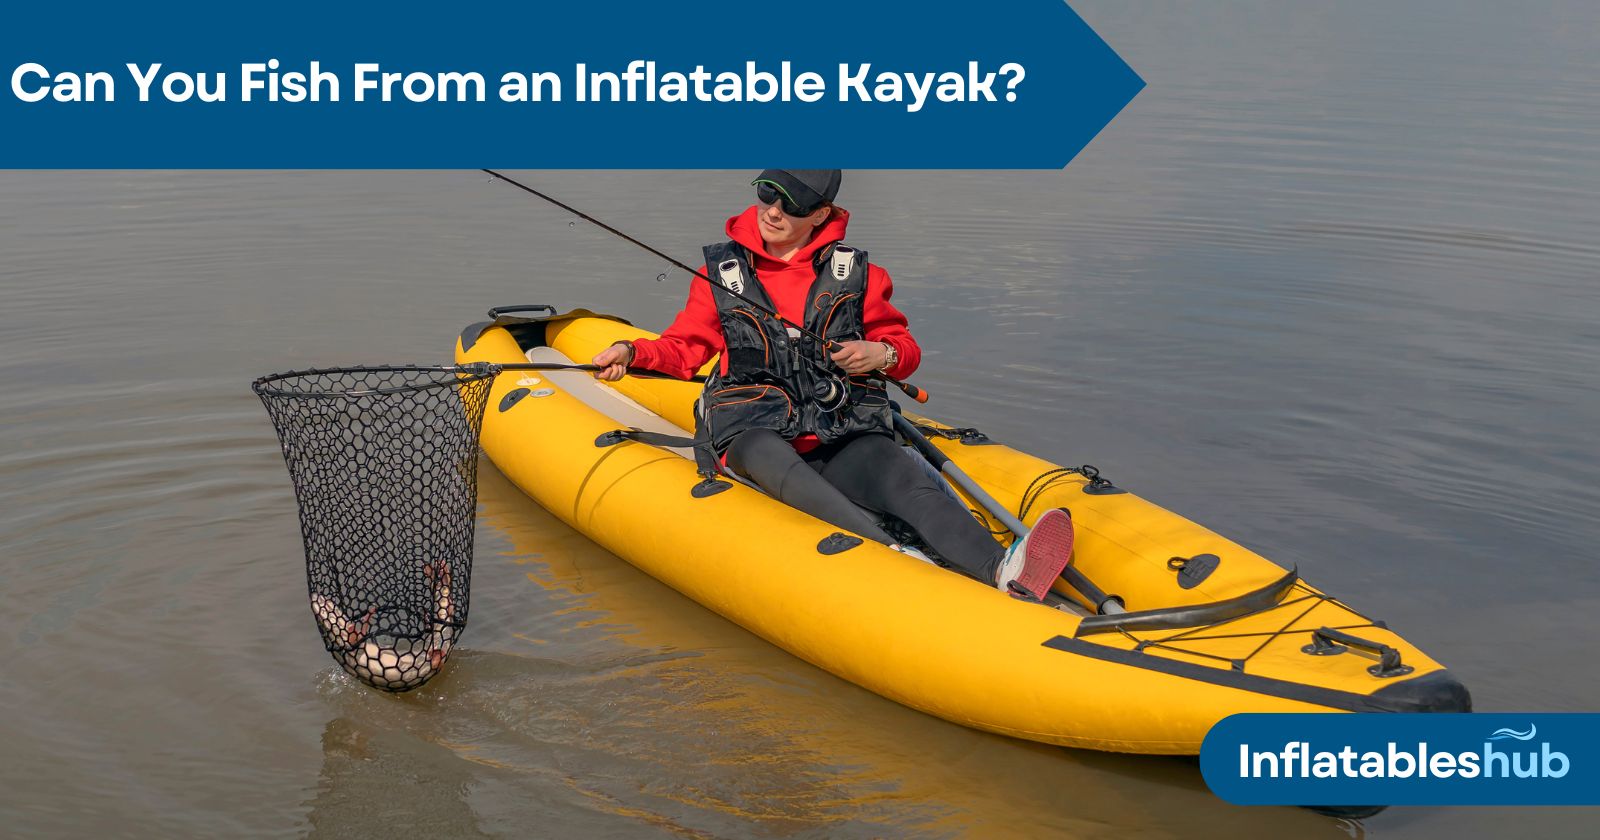 Can You Fish From an Inflatable Kayak